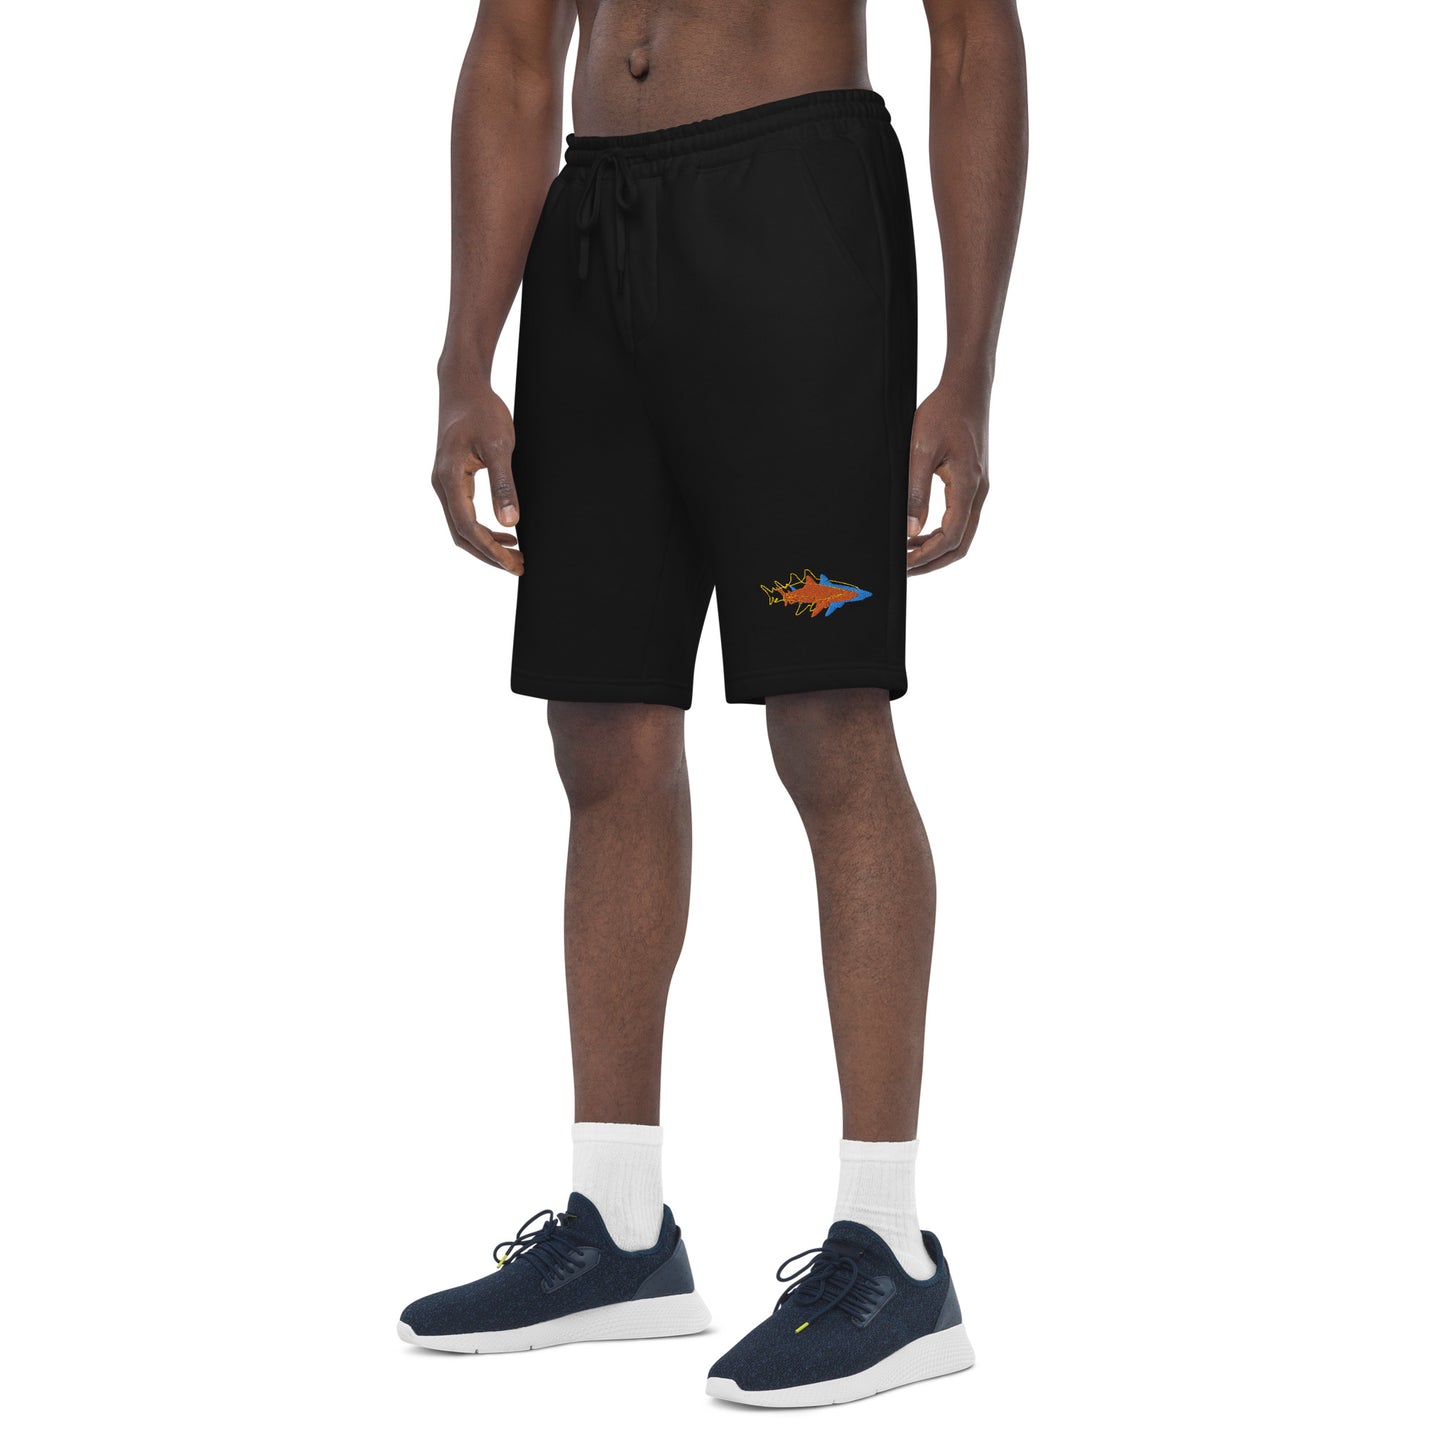 STAY THE COURSE Fleece Shorts